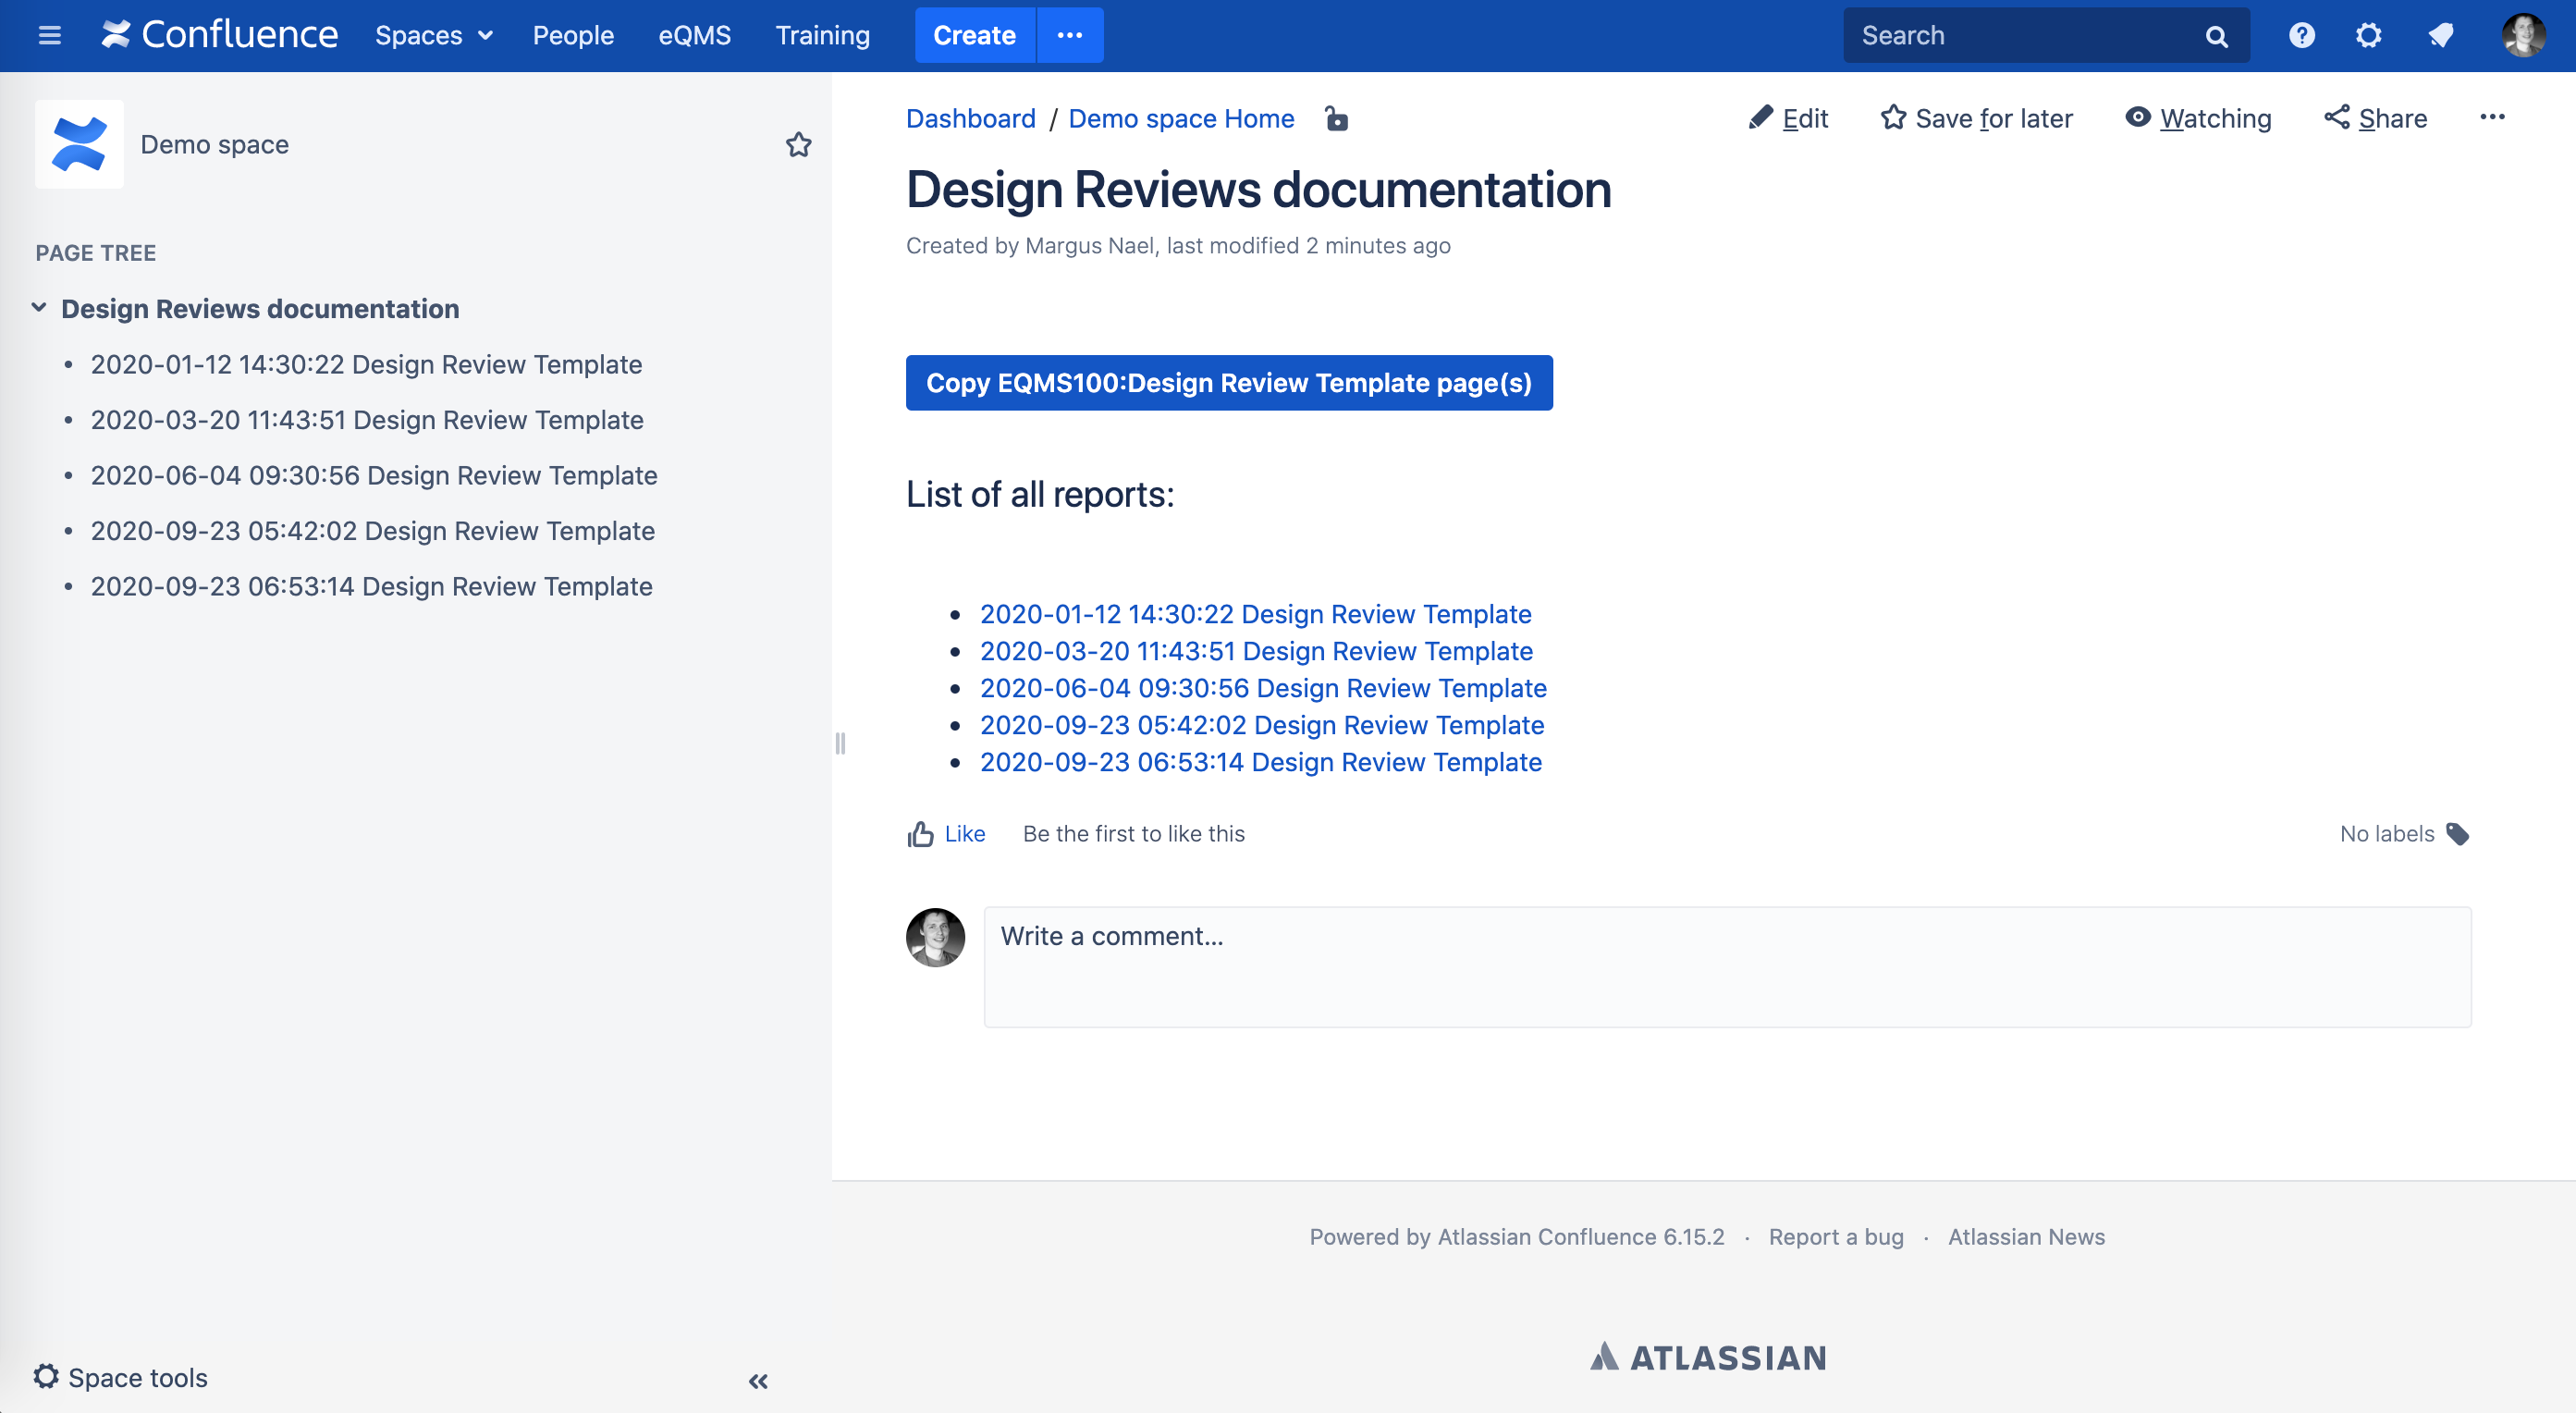 How to Use Confluence Pages as Templates